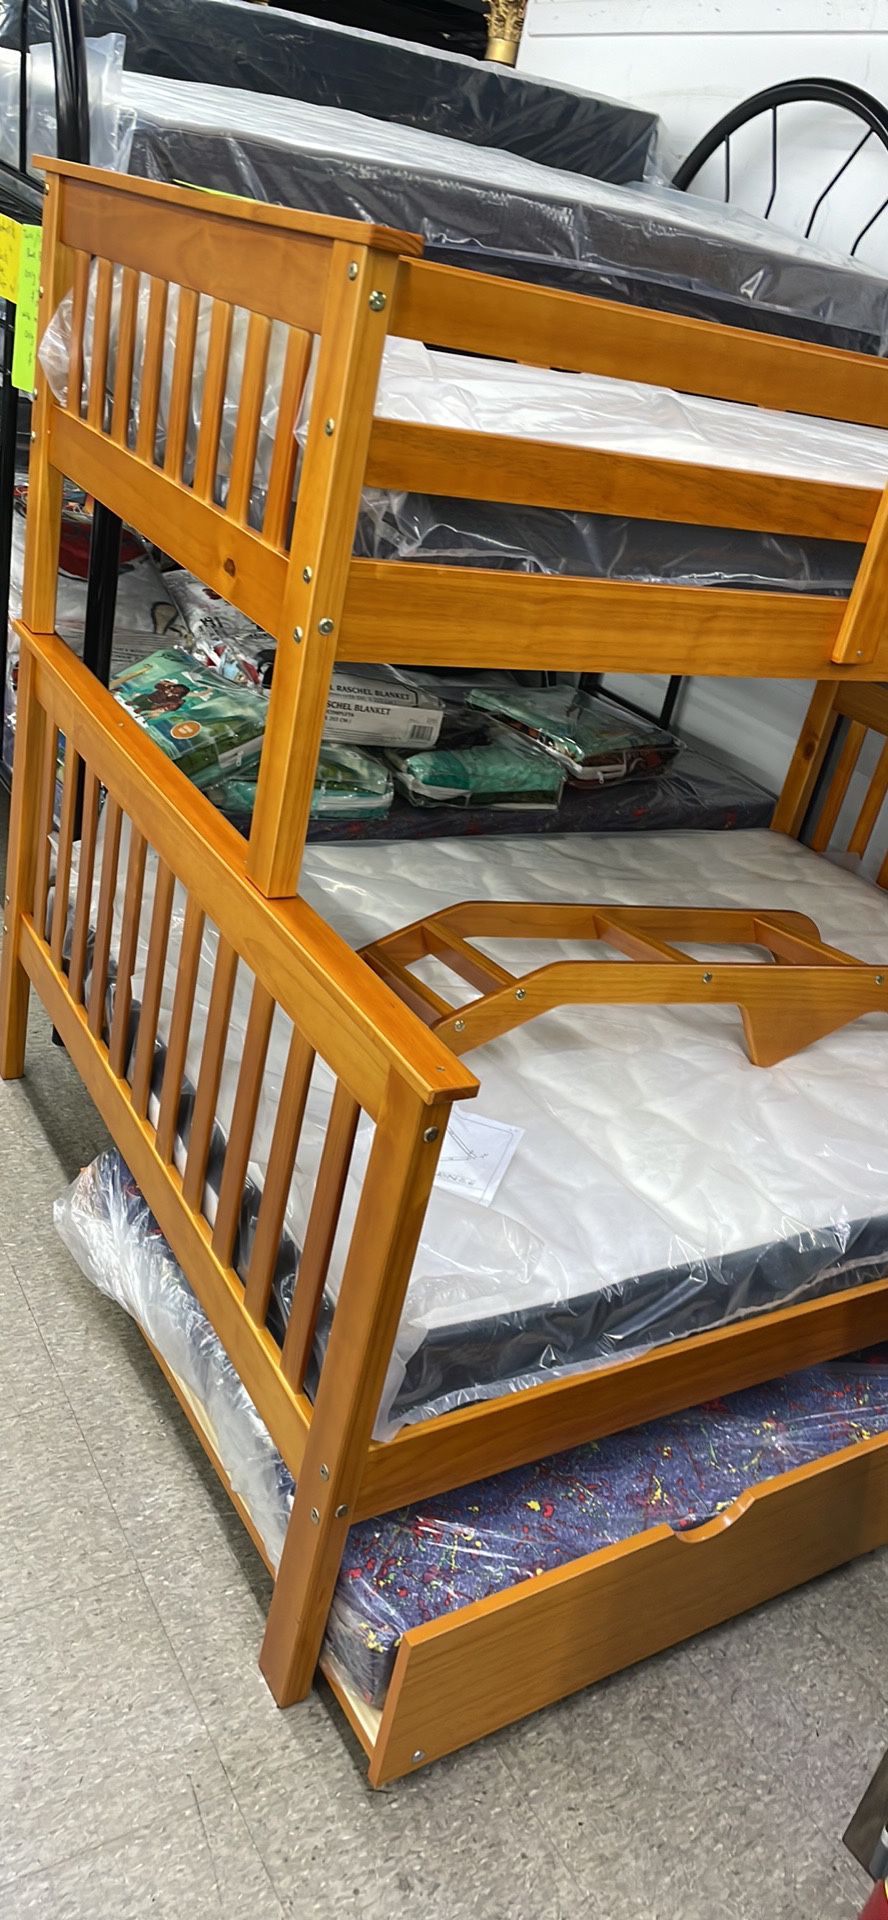 Treble Bunk Bed For $49 down Payment Finance 